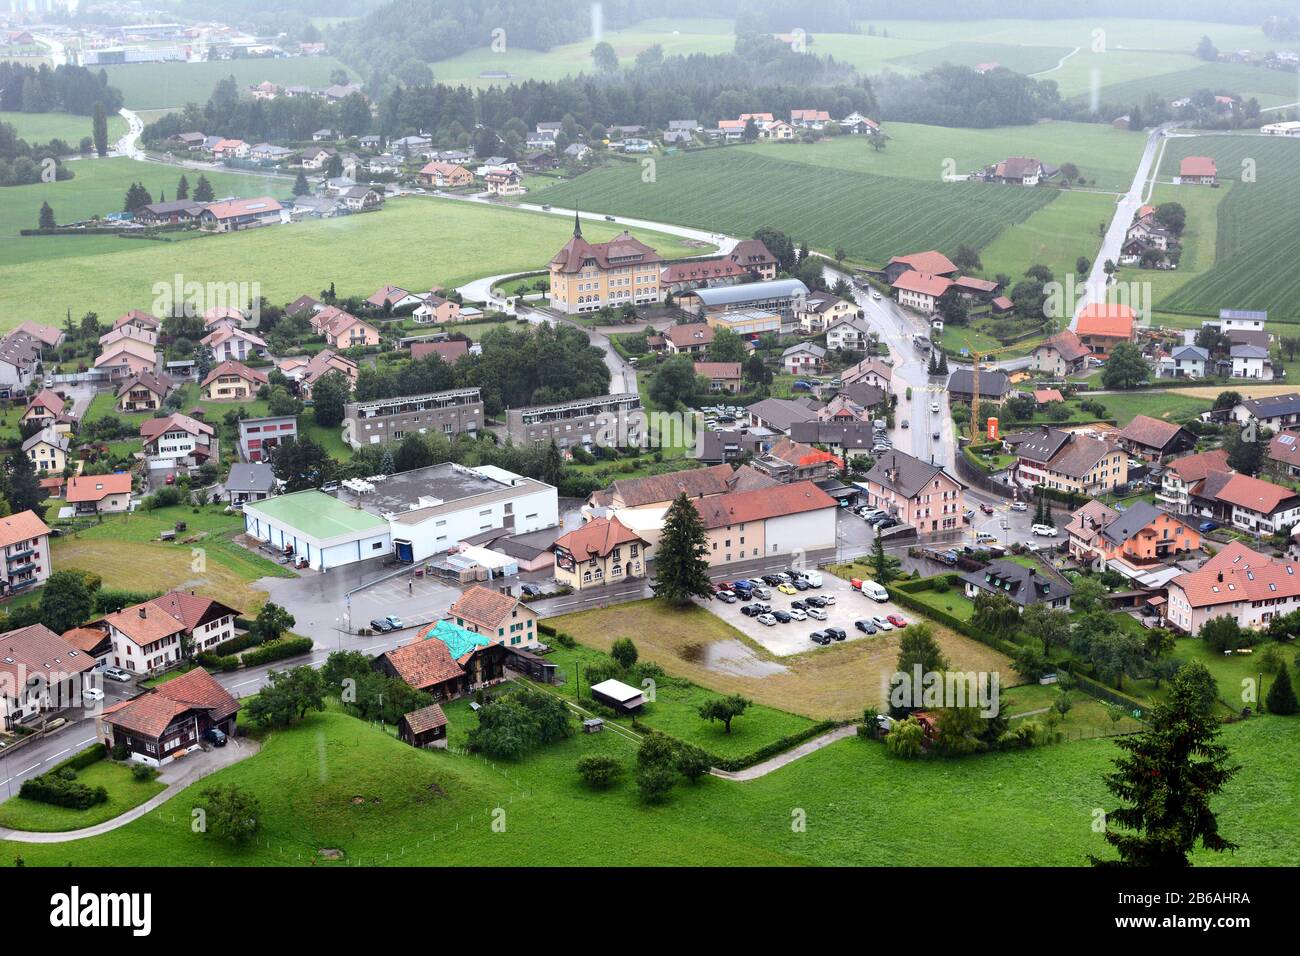 GRUYERES, SWITZERLAND - JULY 8, 2014:  The town of Gruyeres. The medieval town is an important tourist location in the upper valley of the Saane river Stock Photo